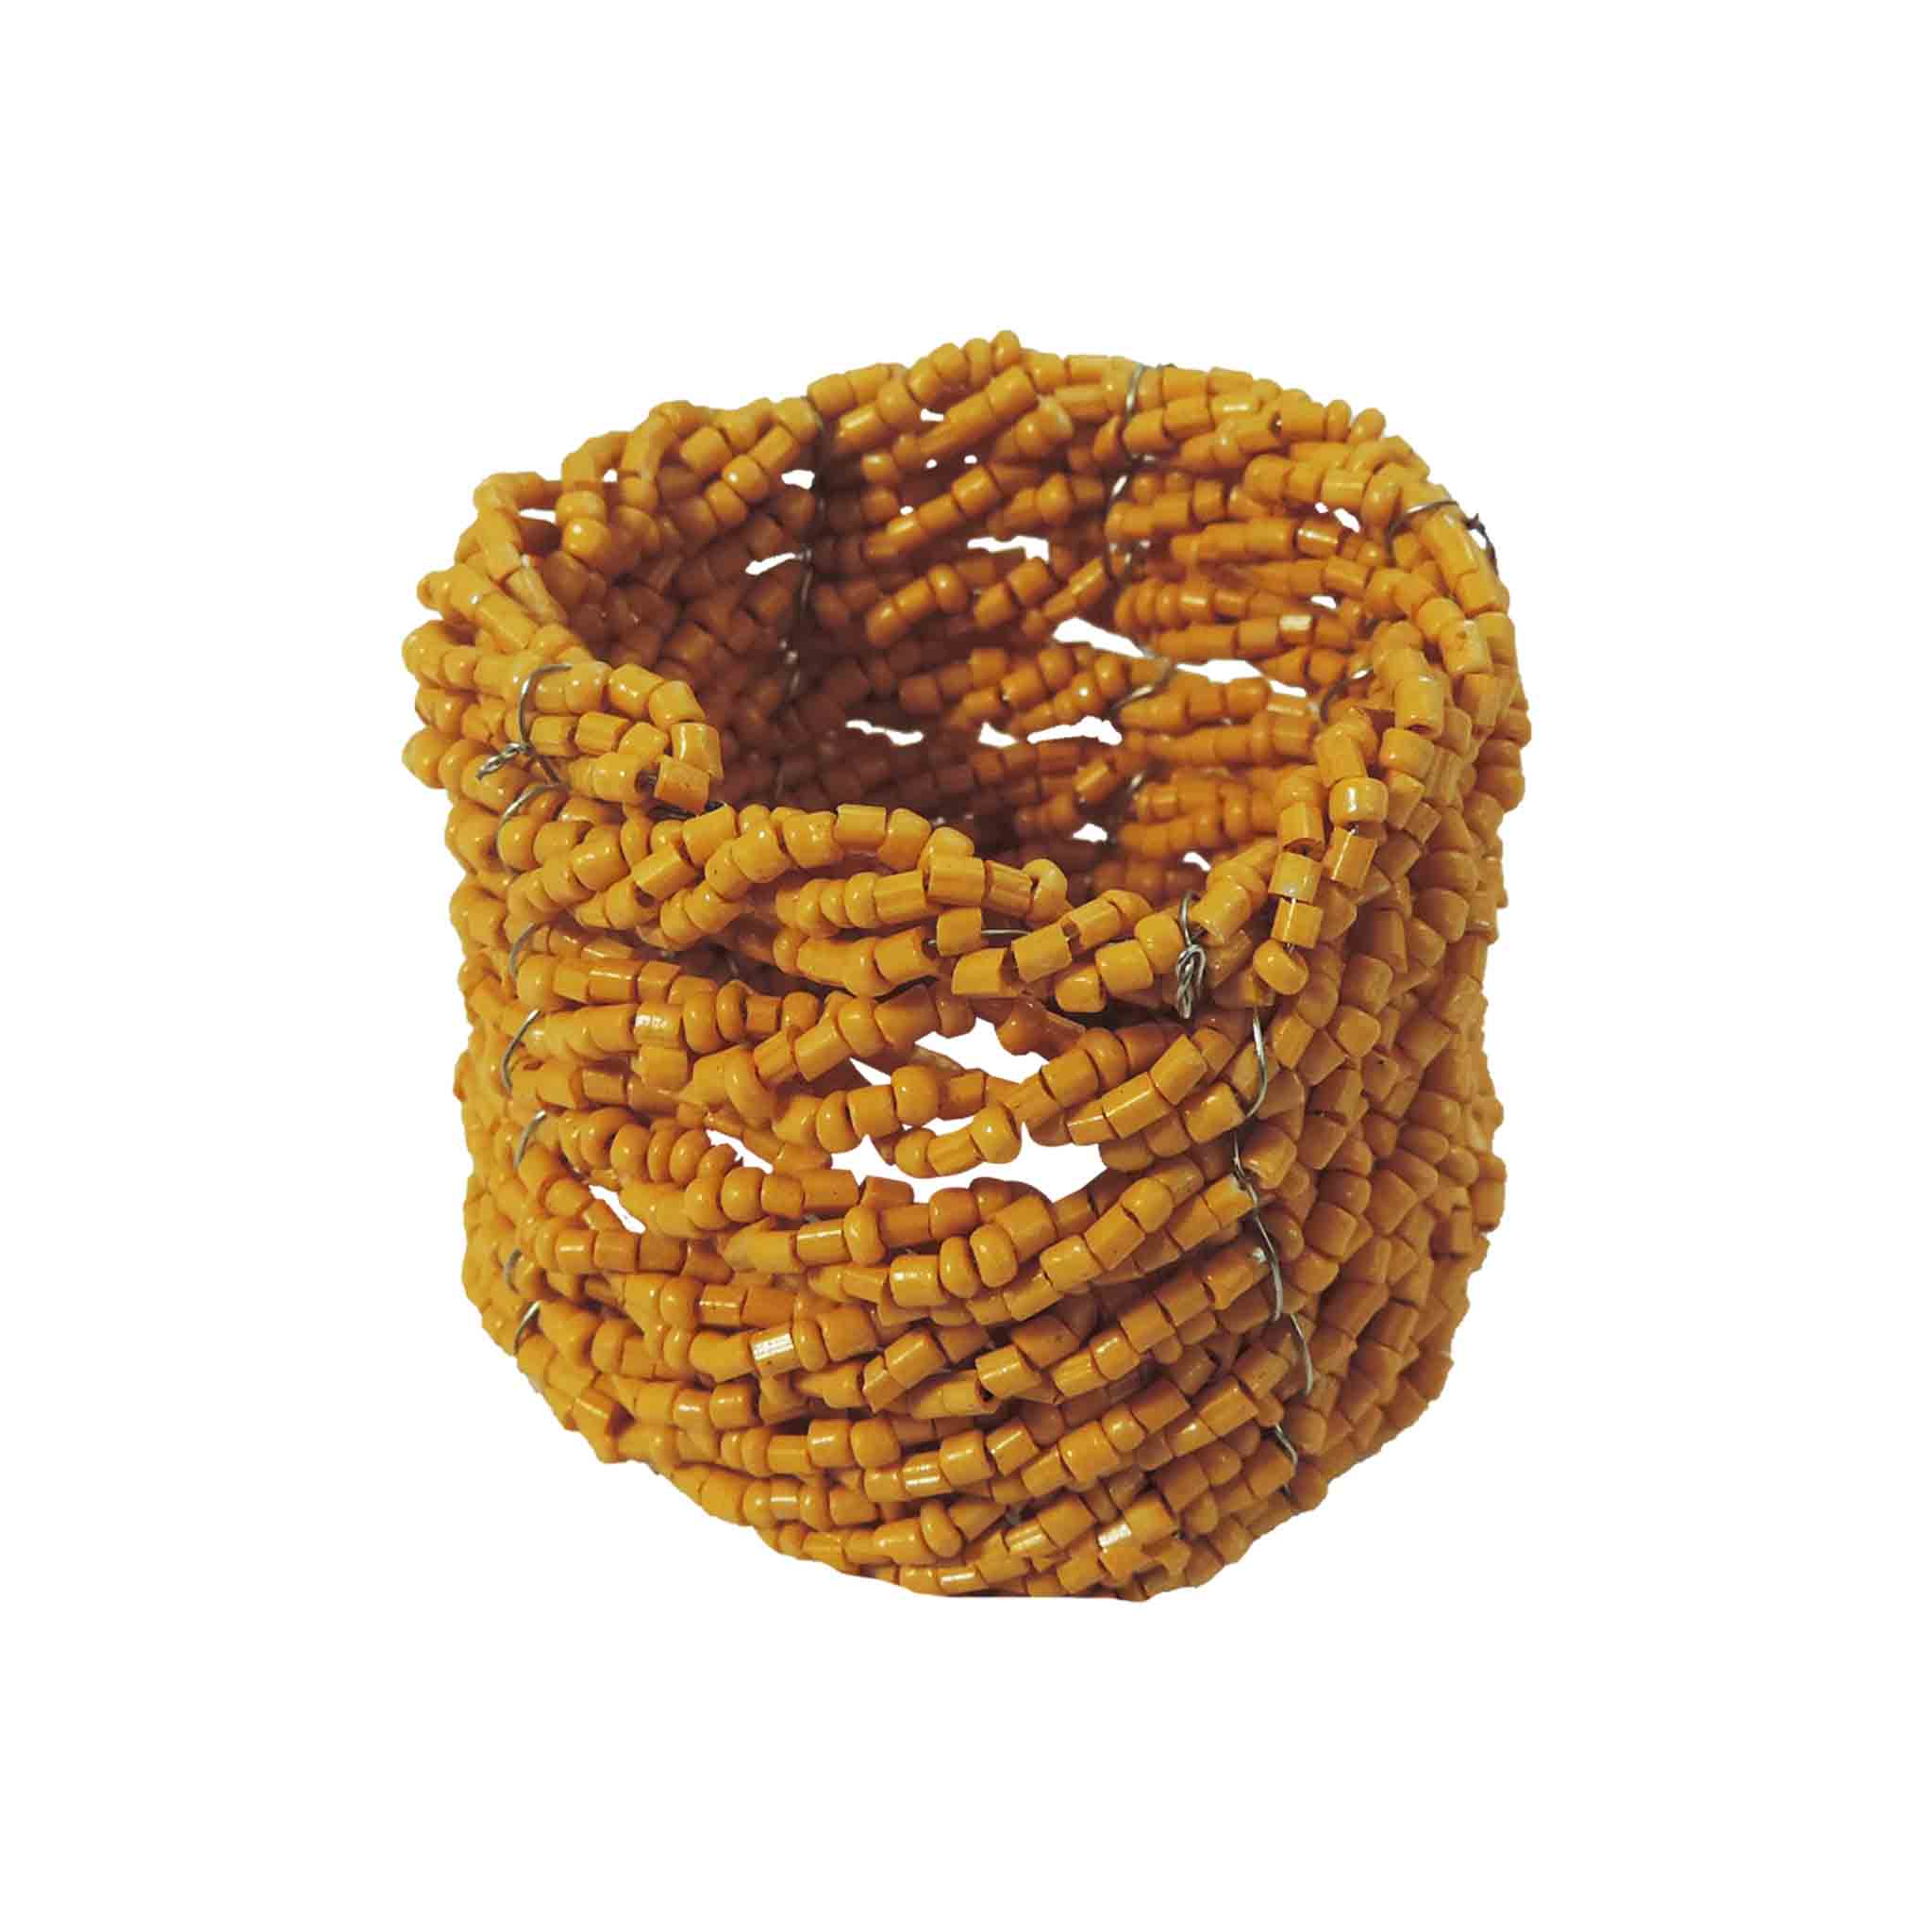 Jute Coil Napkin Ring in Yellow, Set of 4